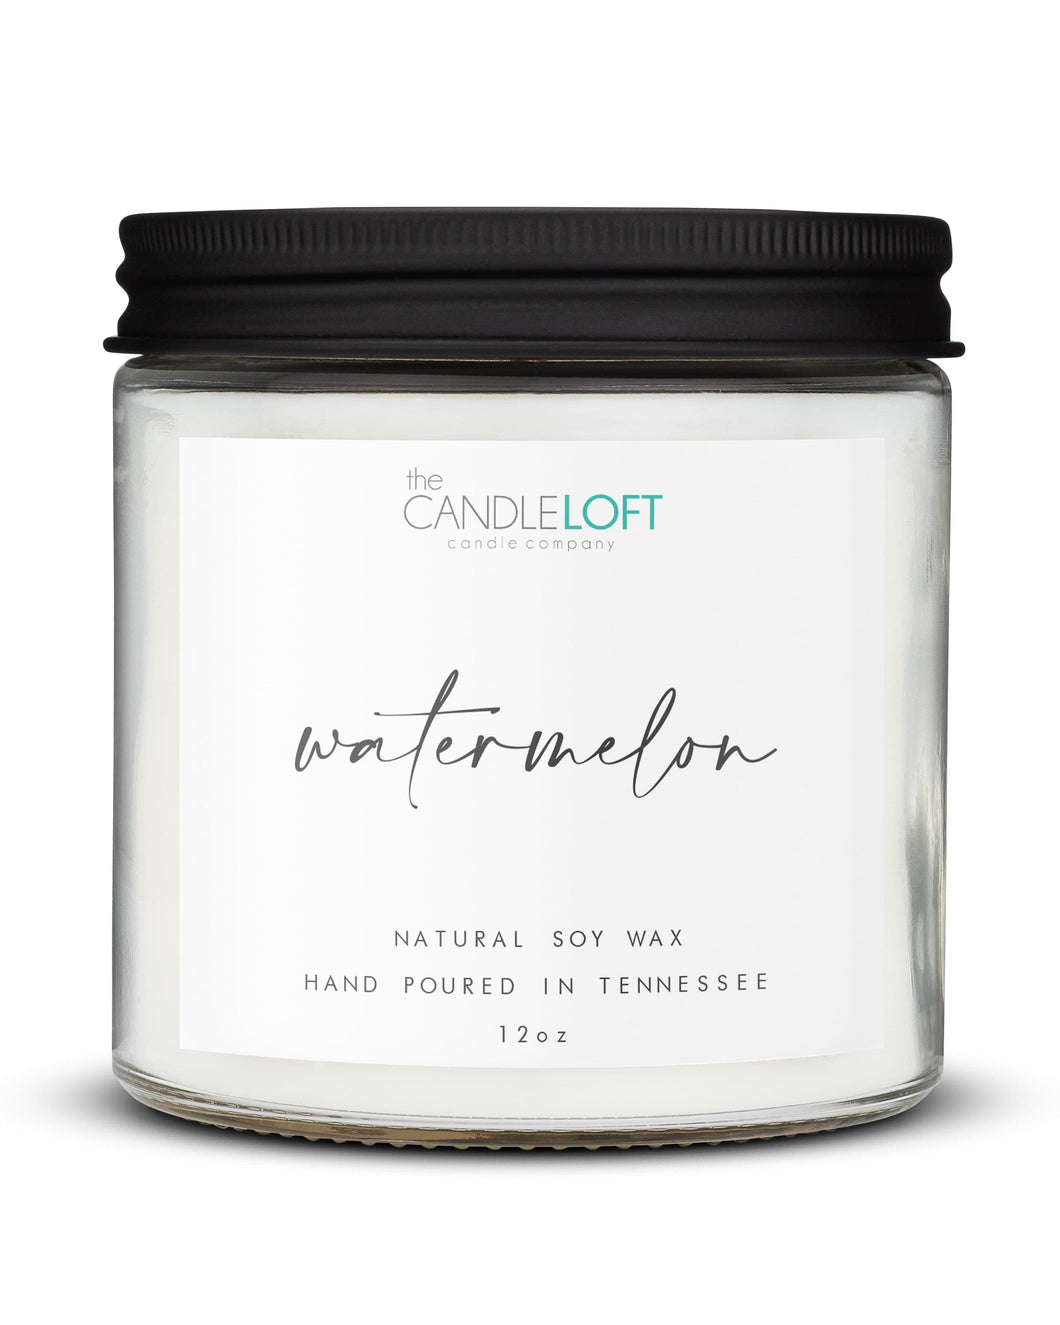 The Candle Loft Candles Signature 12oz Watermelon Candle